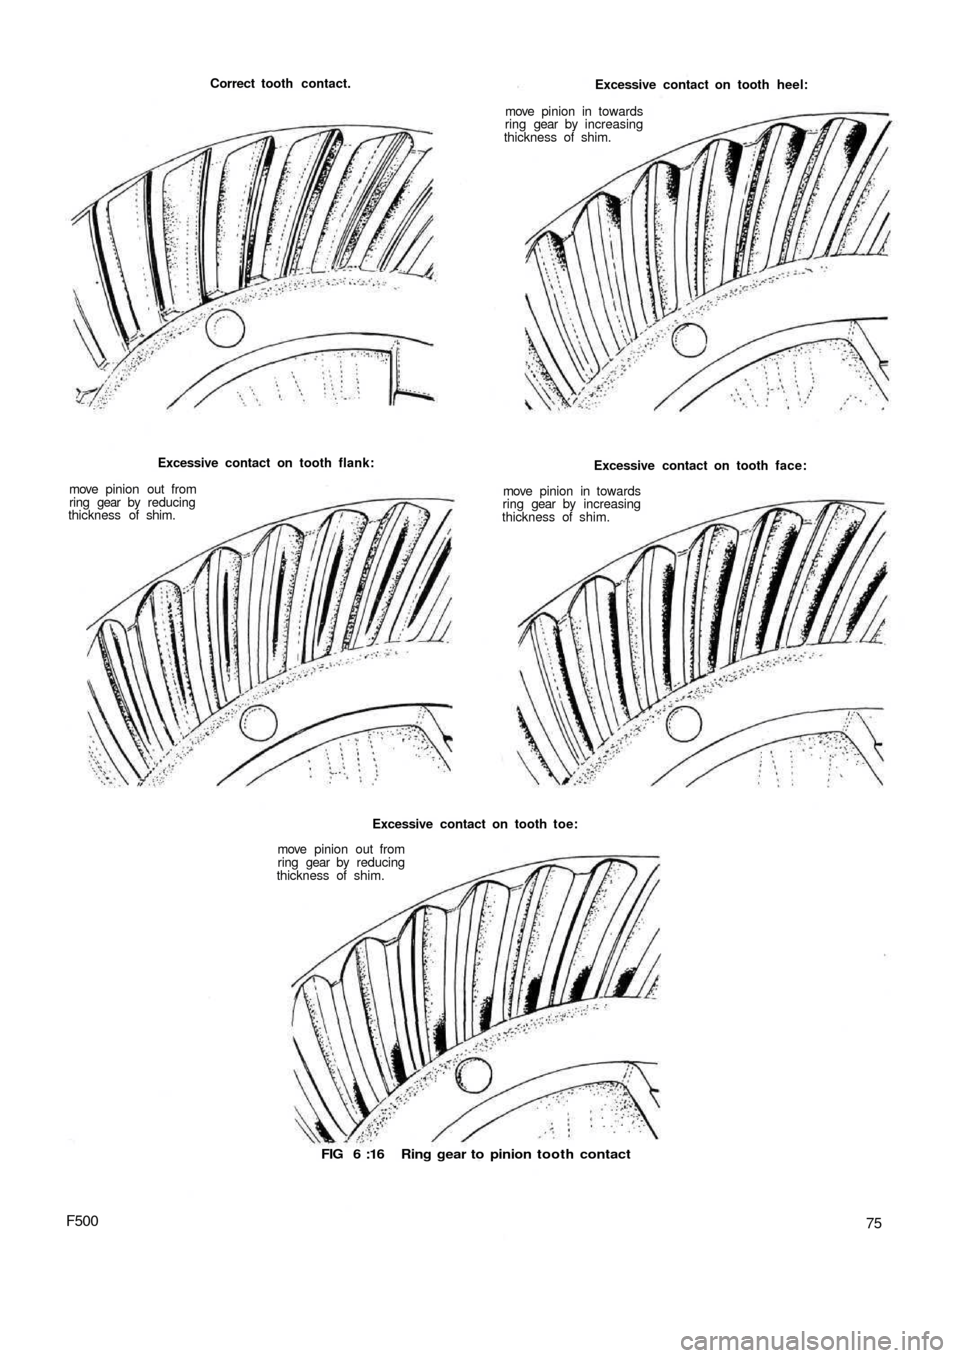 FIAT 500 1957 1.G Repair Manual Correct tooth contact.
Excessive contact on tooth flank:
move  pinion out from
ring gear  by  reducing
thickness of shim.
Excessive contact on tooth toe:
move  pinion out from
ring gear by reducing
th